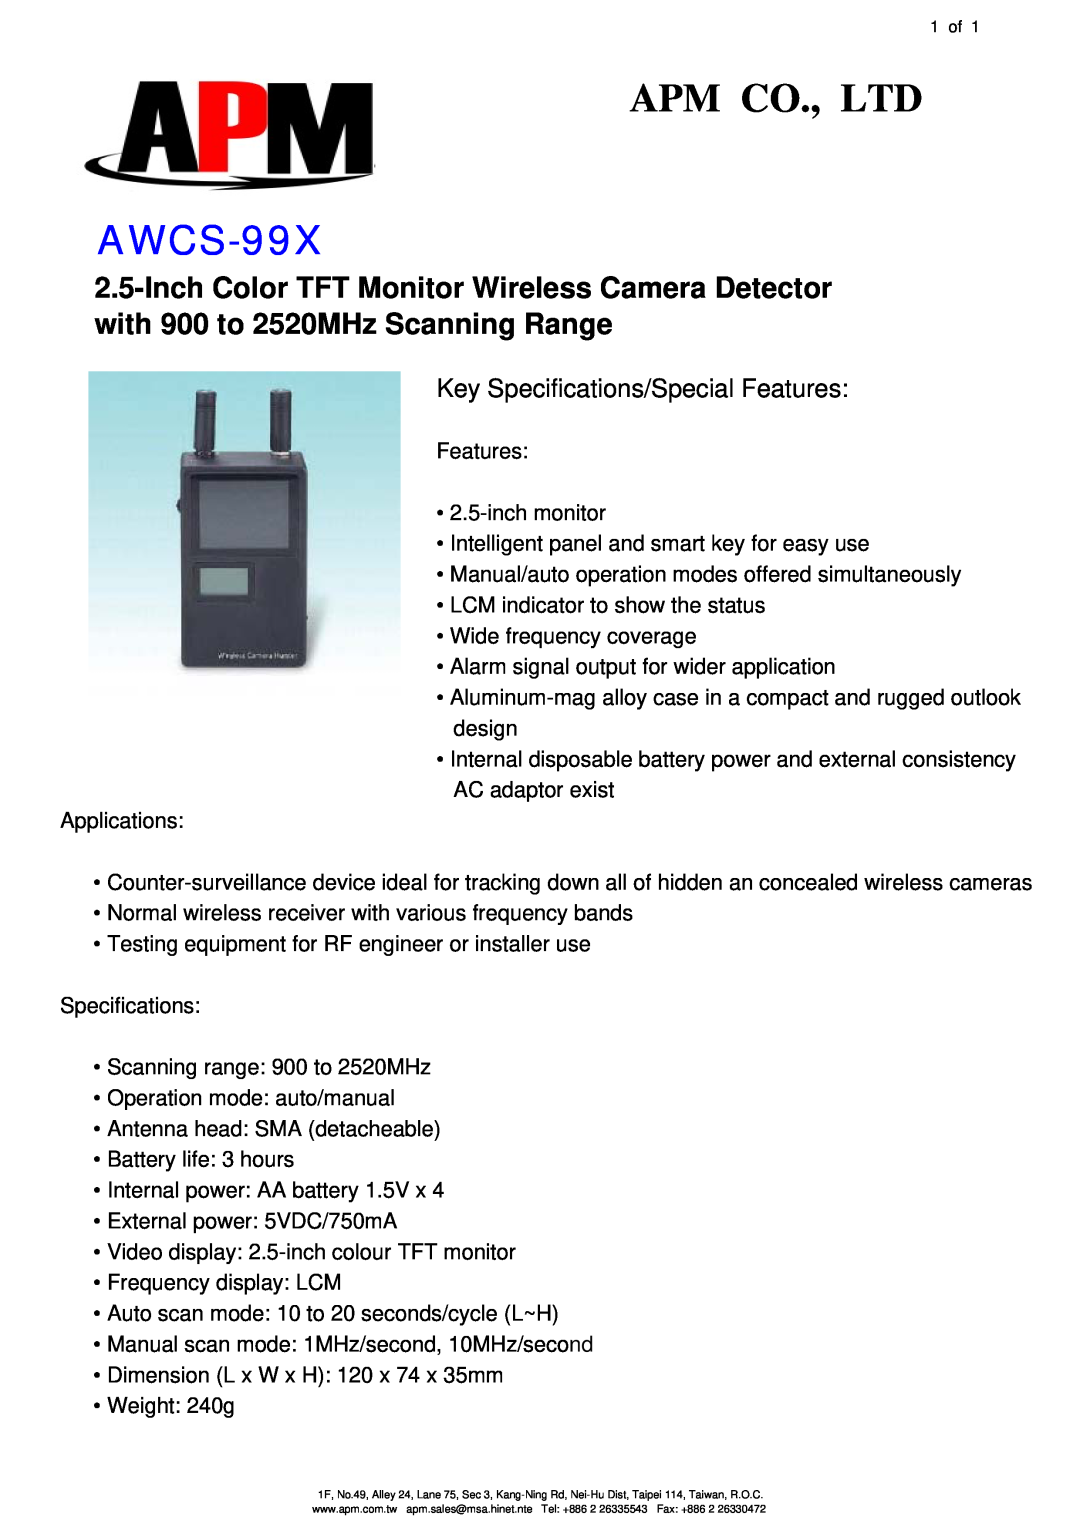 APM AWCS-99X specifications Key Specifications/Special Features 